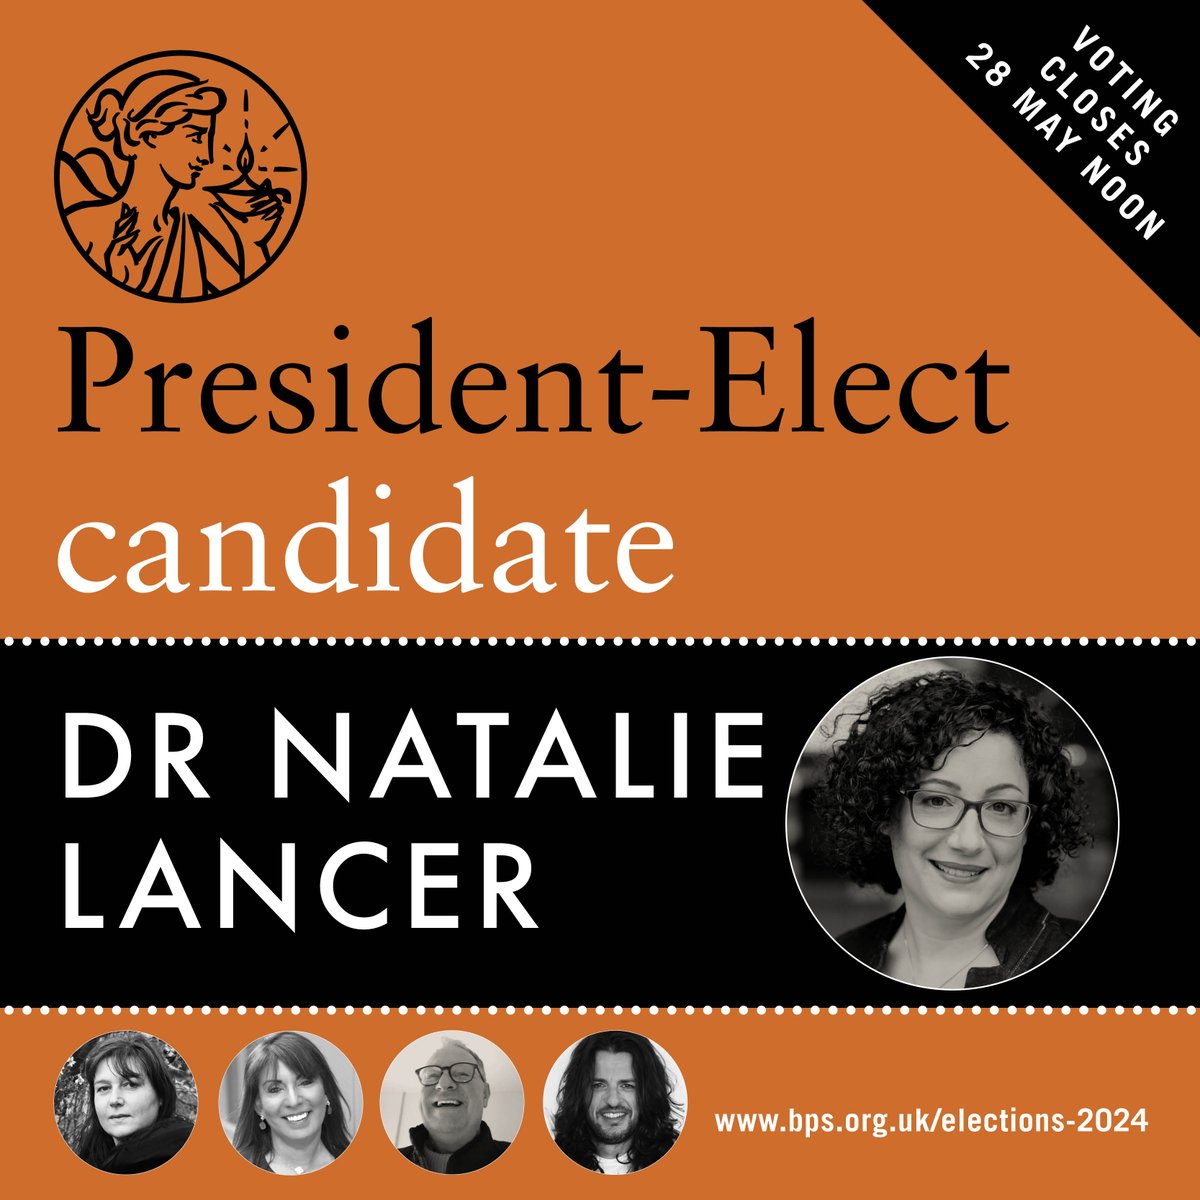 Meet President-Elect candidate, Dr Natalie Lancer, one of five candidates standing for the role of President-Elect this year. Members can now vote for their preferred candidate for the roles of both President-Elect and Elected-Trustee. Meet Natalie: bps.org.uk/meet-candidate…